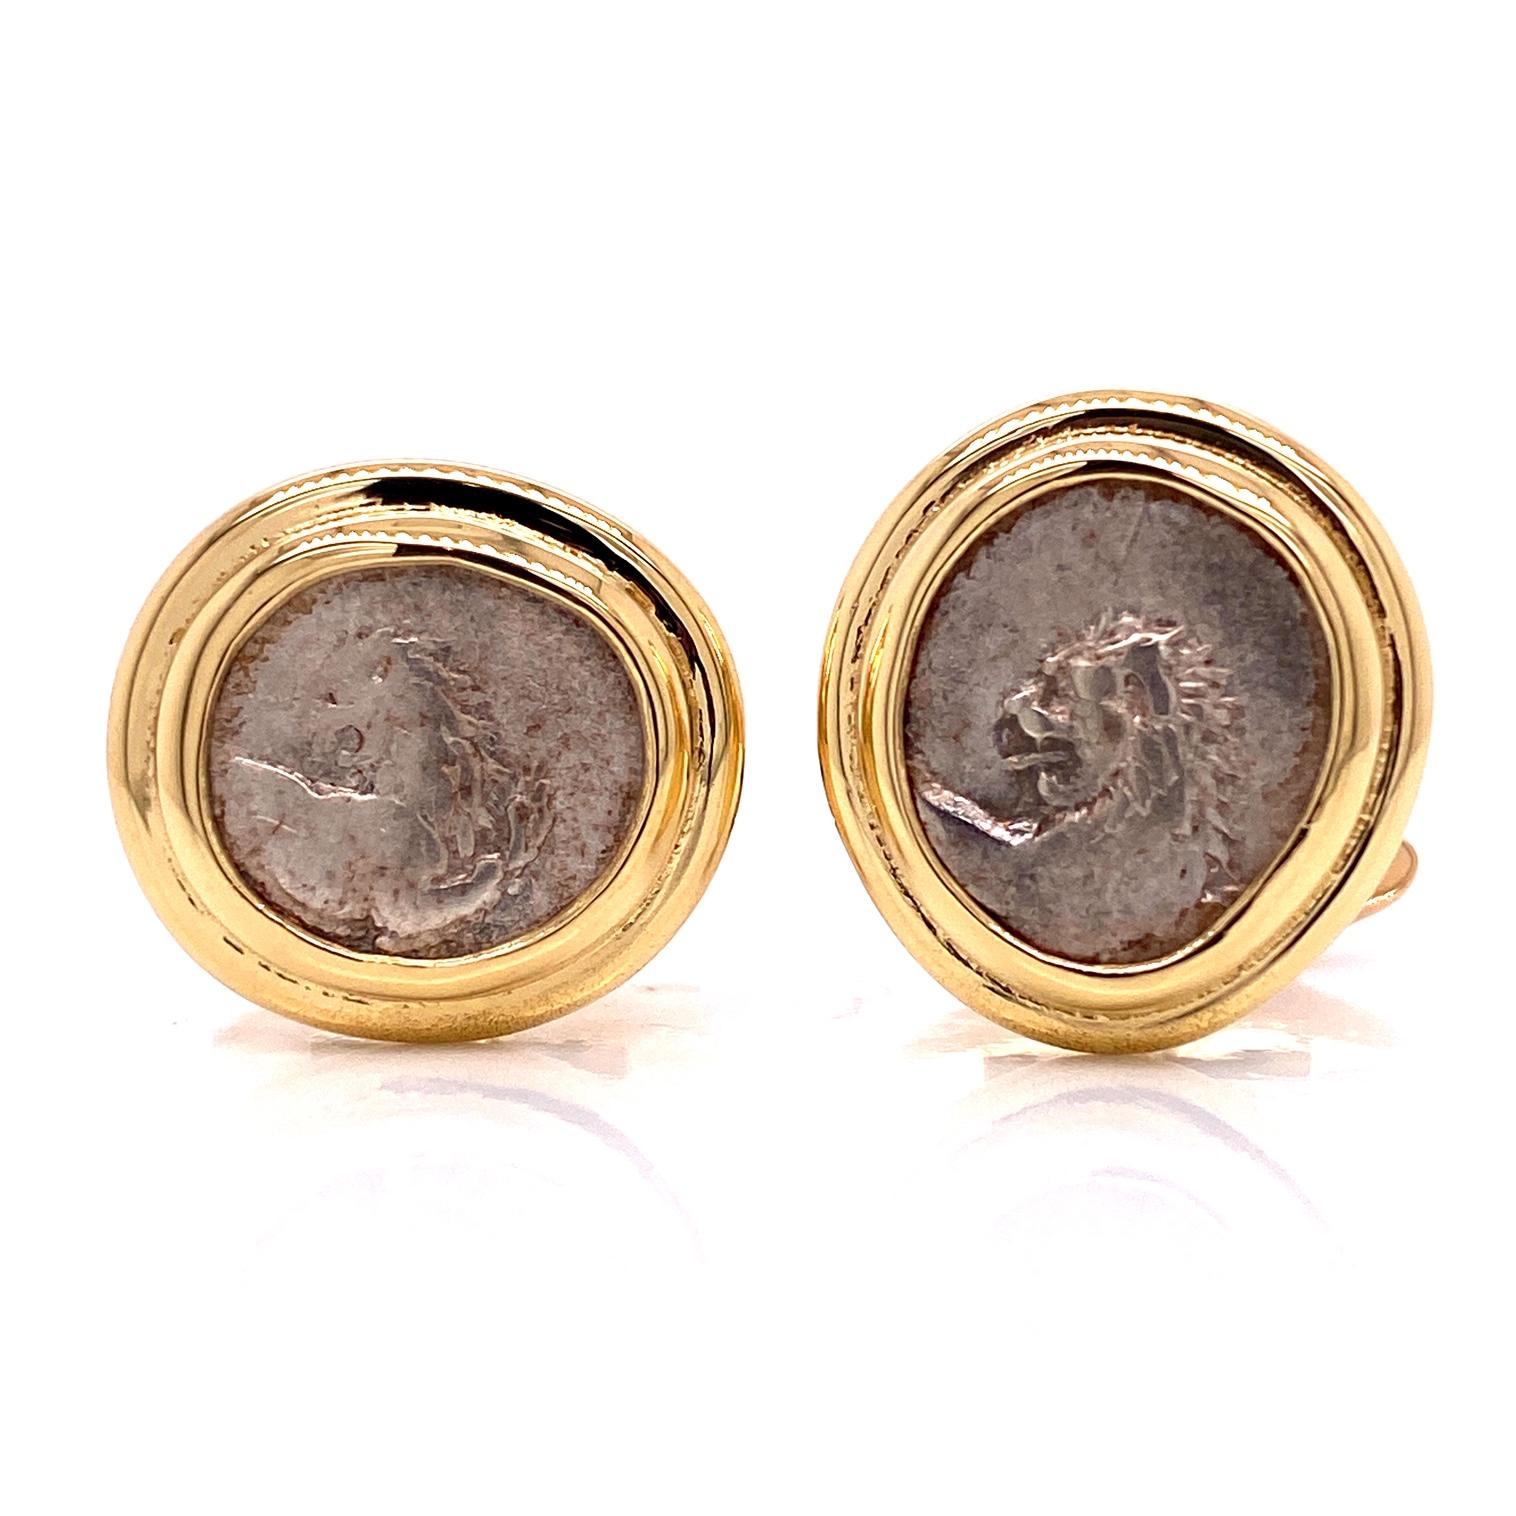 A pair of 18k yellow gold cufflinks set with Greek lion coins ( Thrace, Chersonesos). These cufflinks were made and designed by llyn strong.